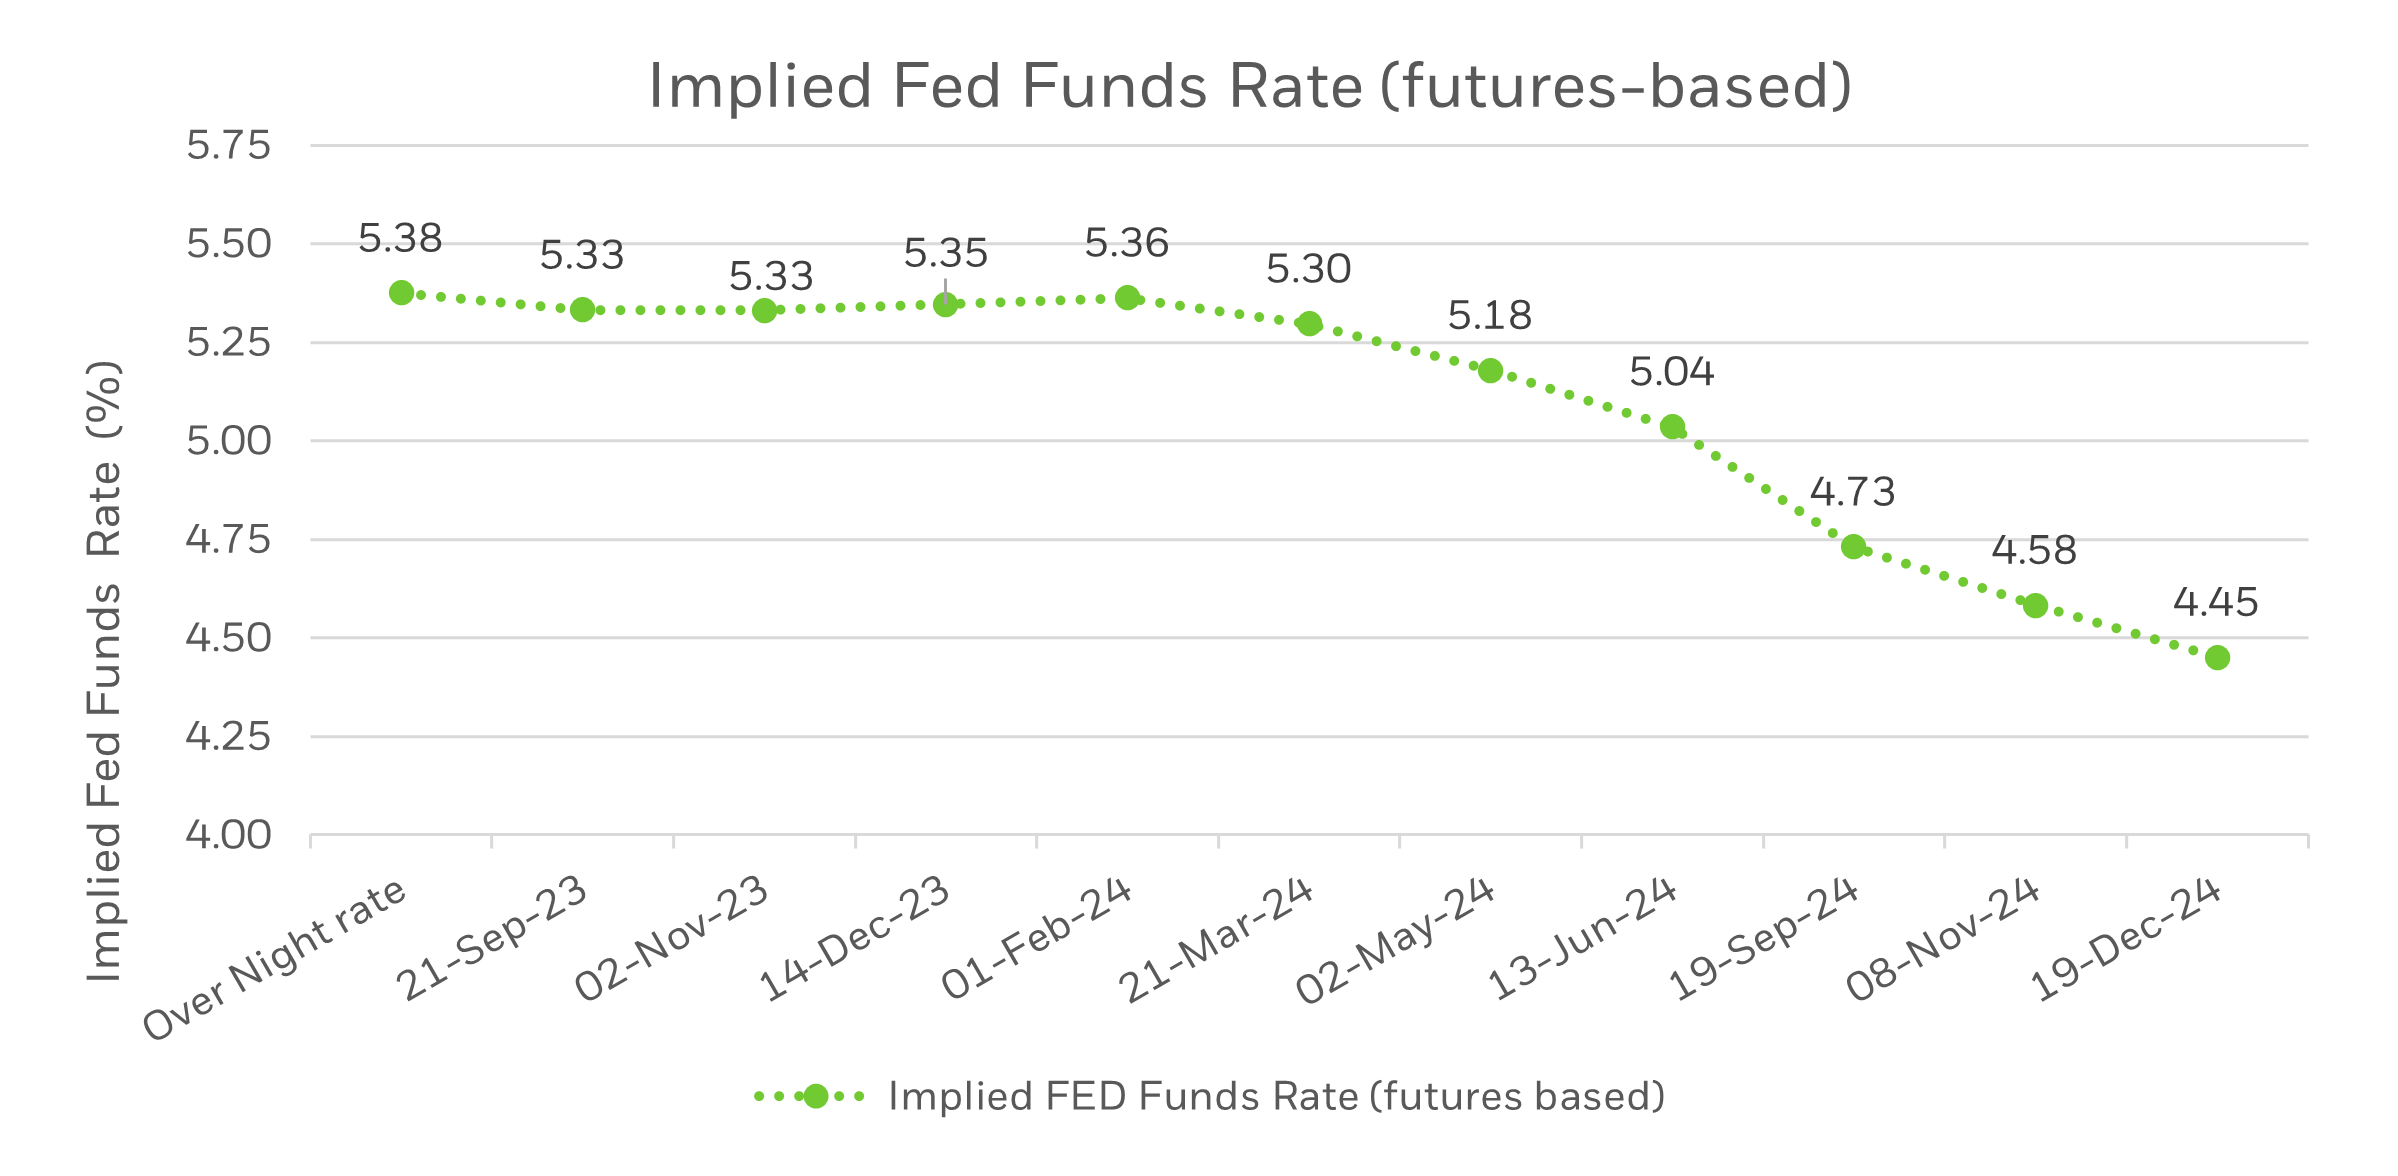 Implied Fed Funds Rate (futures-based) chart